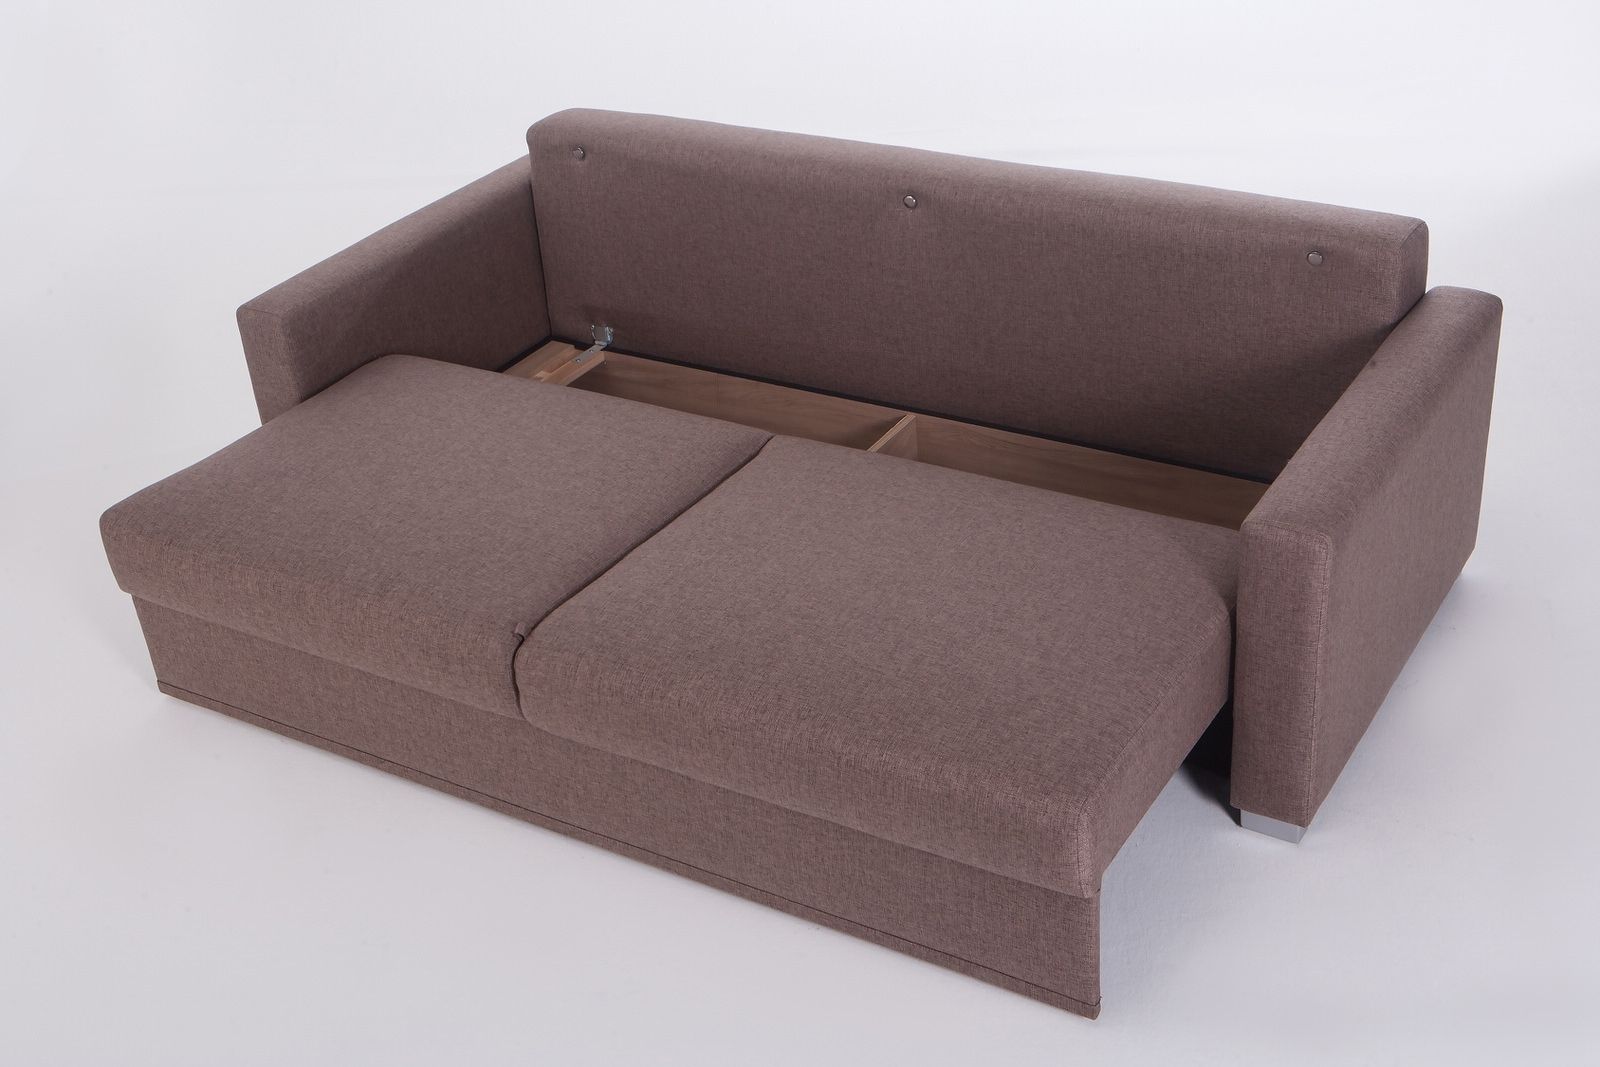 Convertible Sofas Pertaining To Popular Sectional Sofa Bed With Storage — Cabinets, Beds, Sofas And (View 11 of 20)